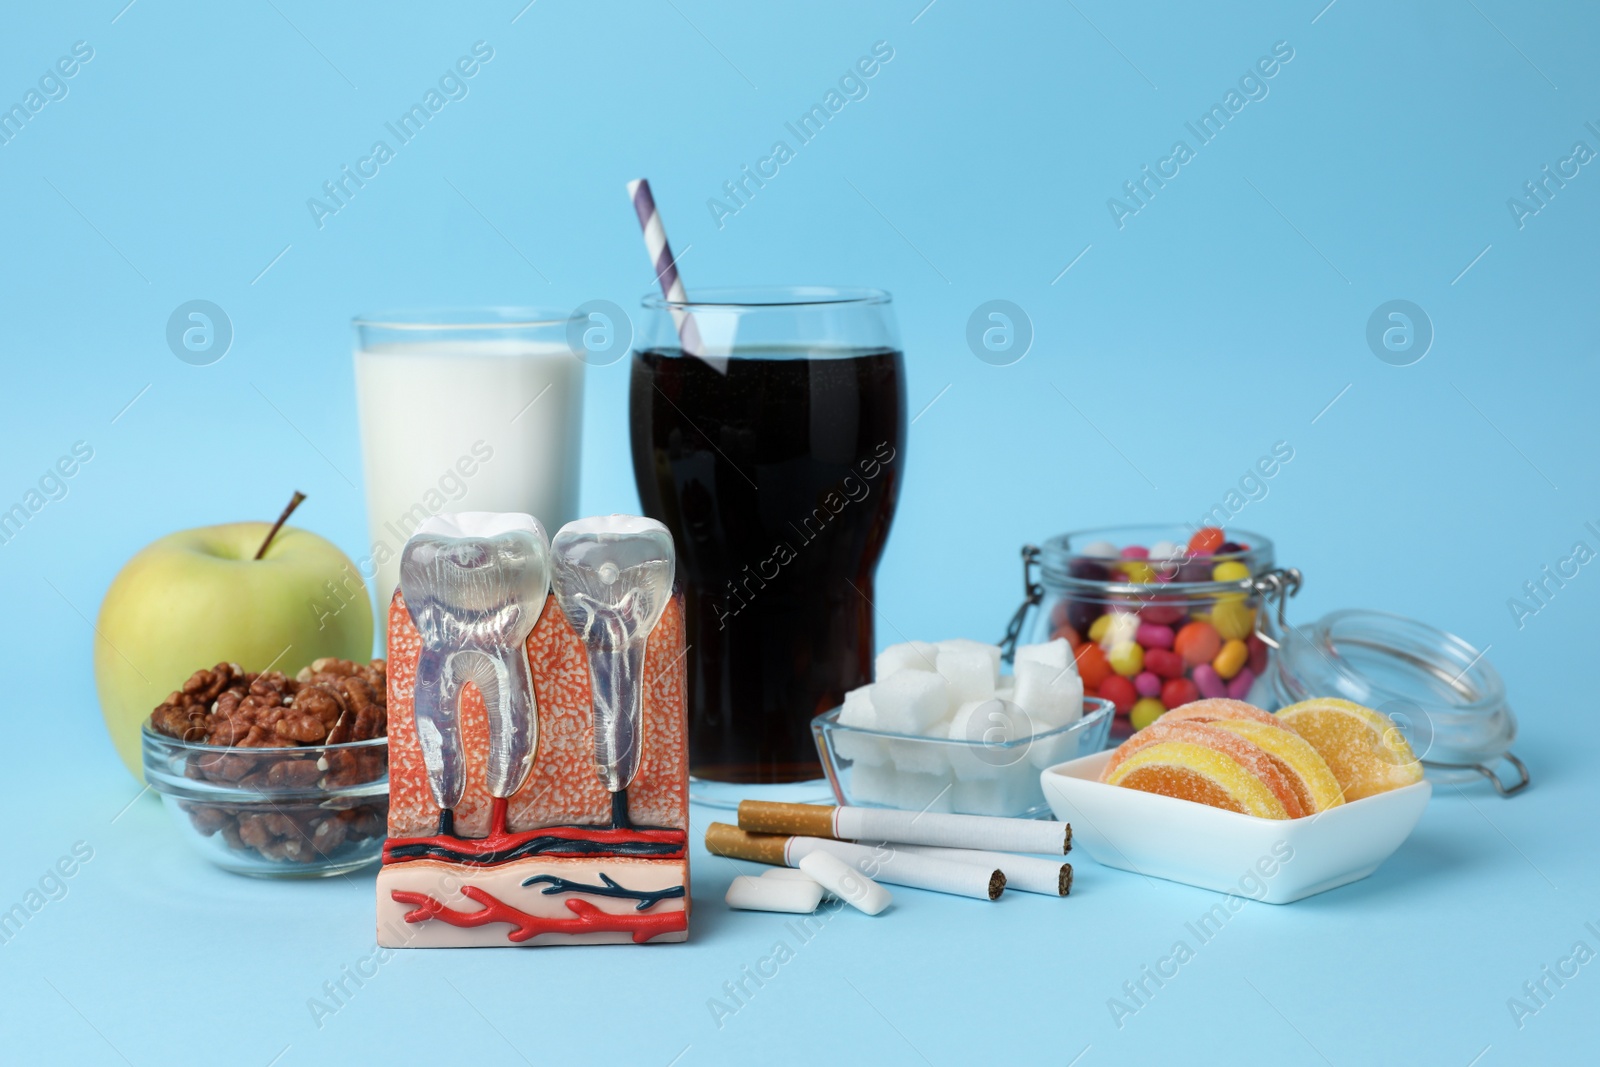 Photo of Model of jaw section with teeth near harmful products on light blue background